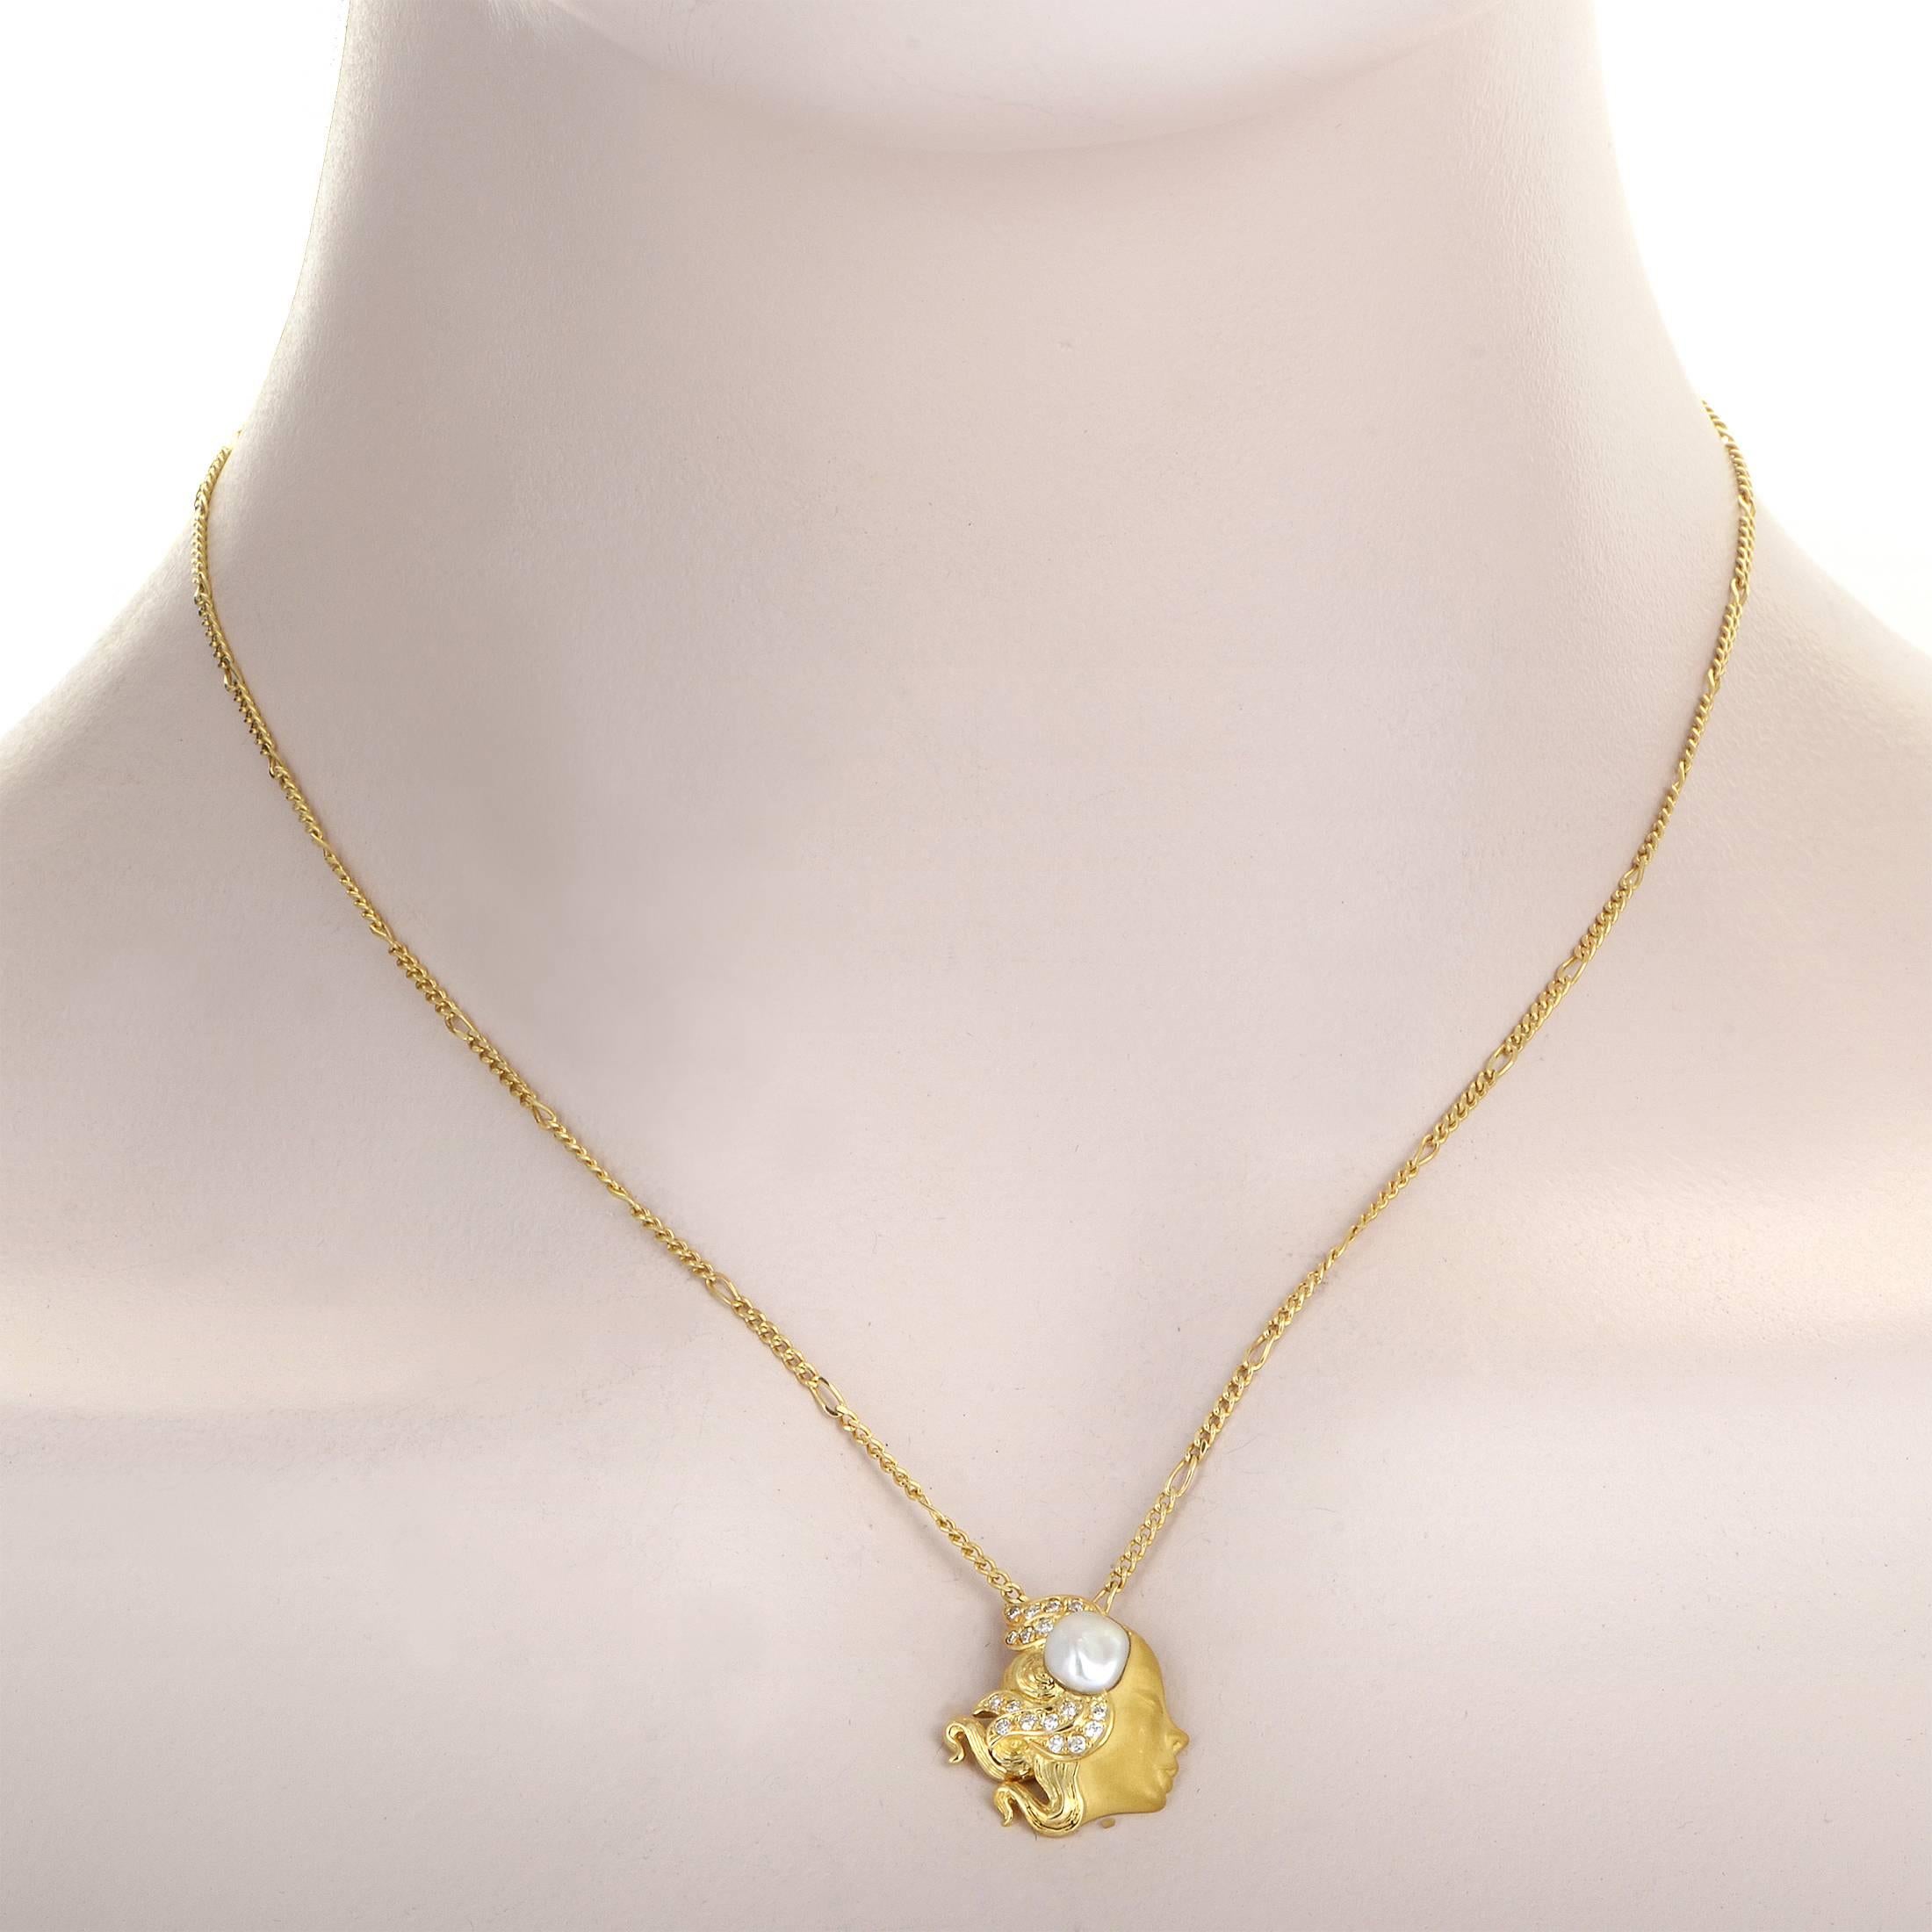 A delightful depiction of a beautiful woman's face and curling hair embellished with sparkling diamonds weighing in total 0.25ct, the fabulous pendant of this enchanting 18K yellow gold necklace from Carrera y Carrera also boasts the splendid mother